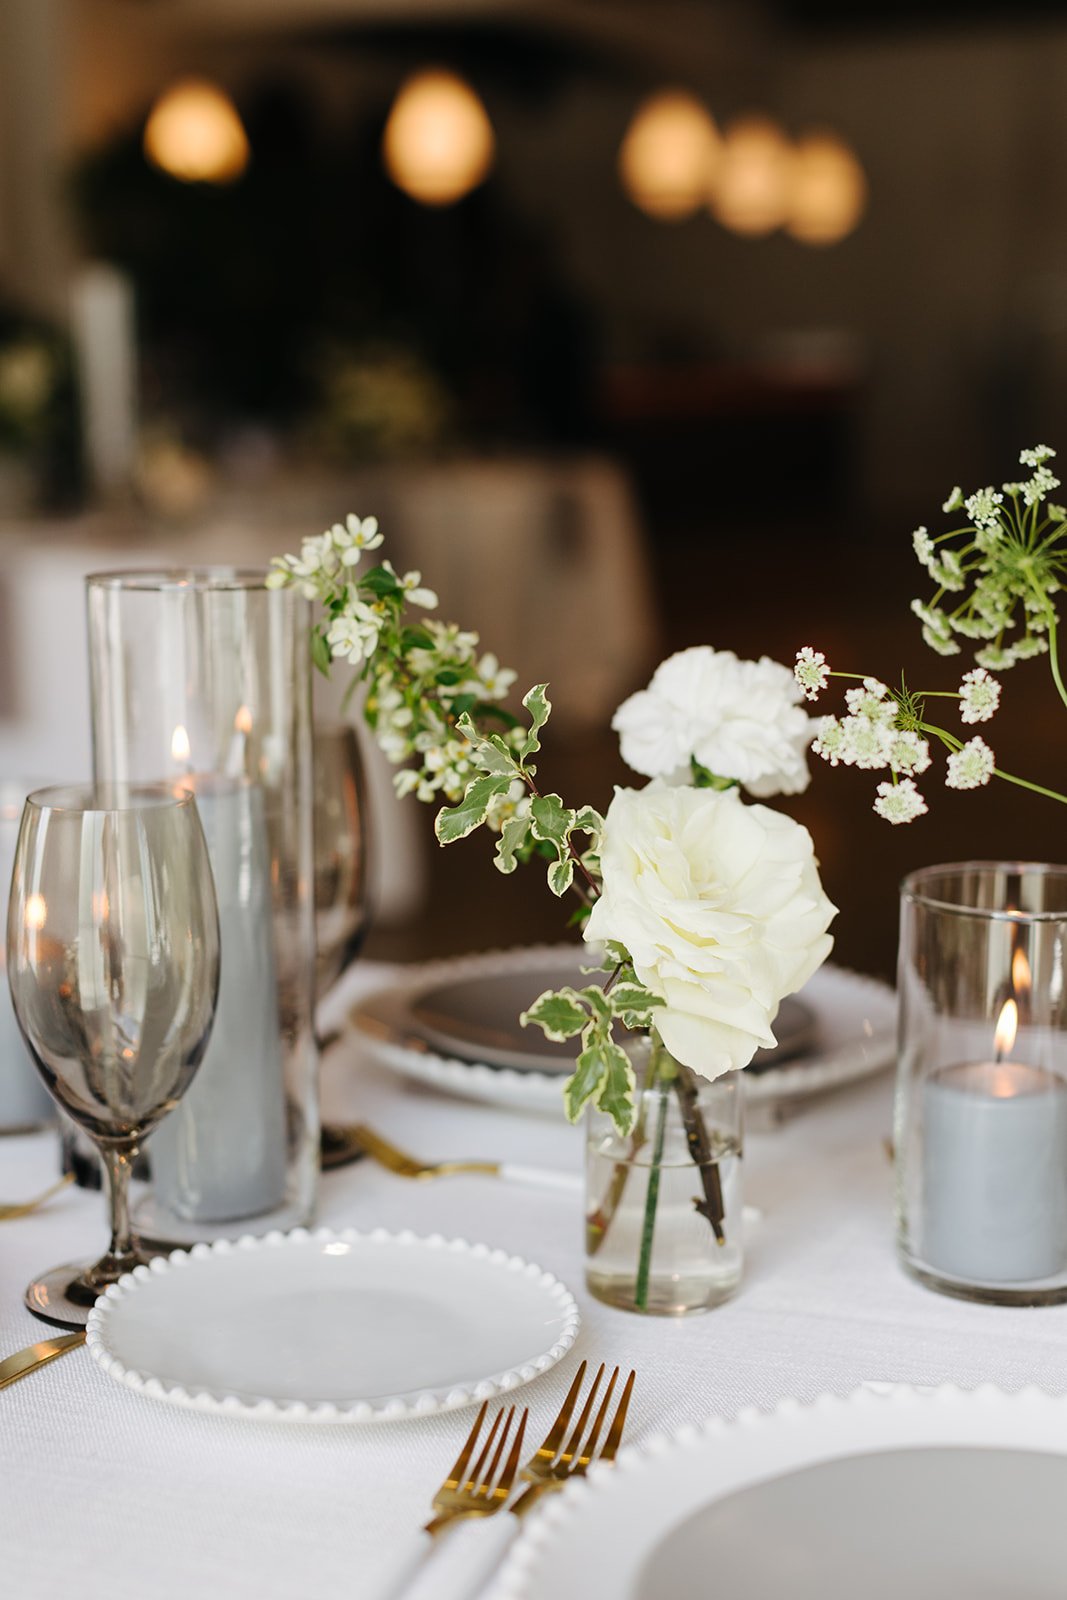 Elegant bud vases with florals of roses, ranunculus, sweet peas, Queen Anne’s lace, butterfly ranunculus in hues of white, cream and blush. Accented with dusty blue tapers and clear glass votives. Designed by Rosemary and Finch in Nashville, TN.